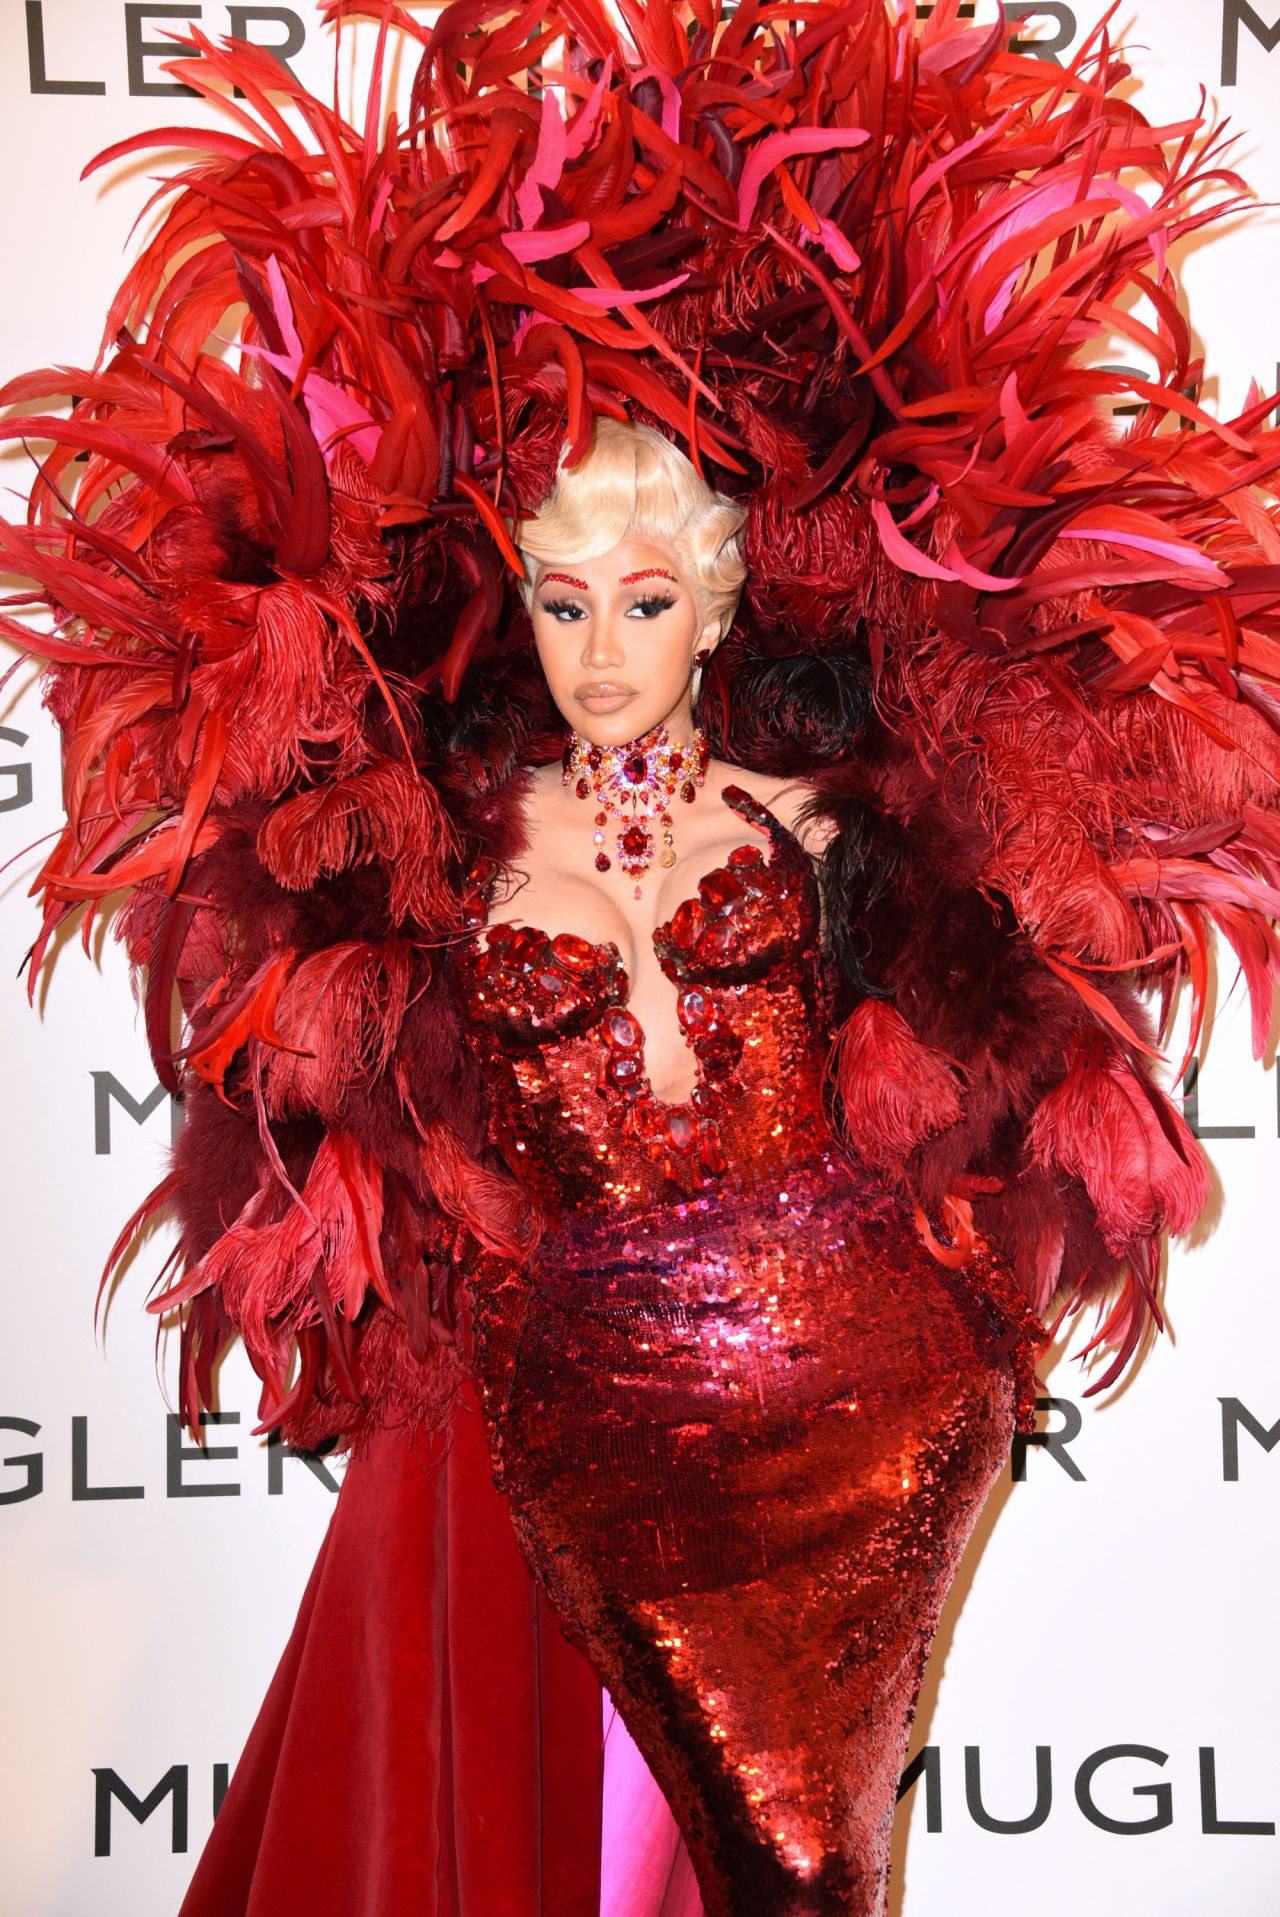 For the opening of the 'Thierry Mugler: Couturissime' exhibition at the Museum of Fine Arts in Paris, Cardi B dazzled in a vintage Mugler look.